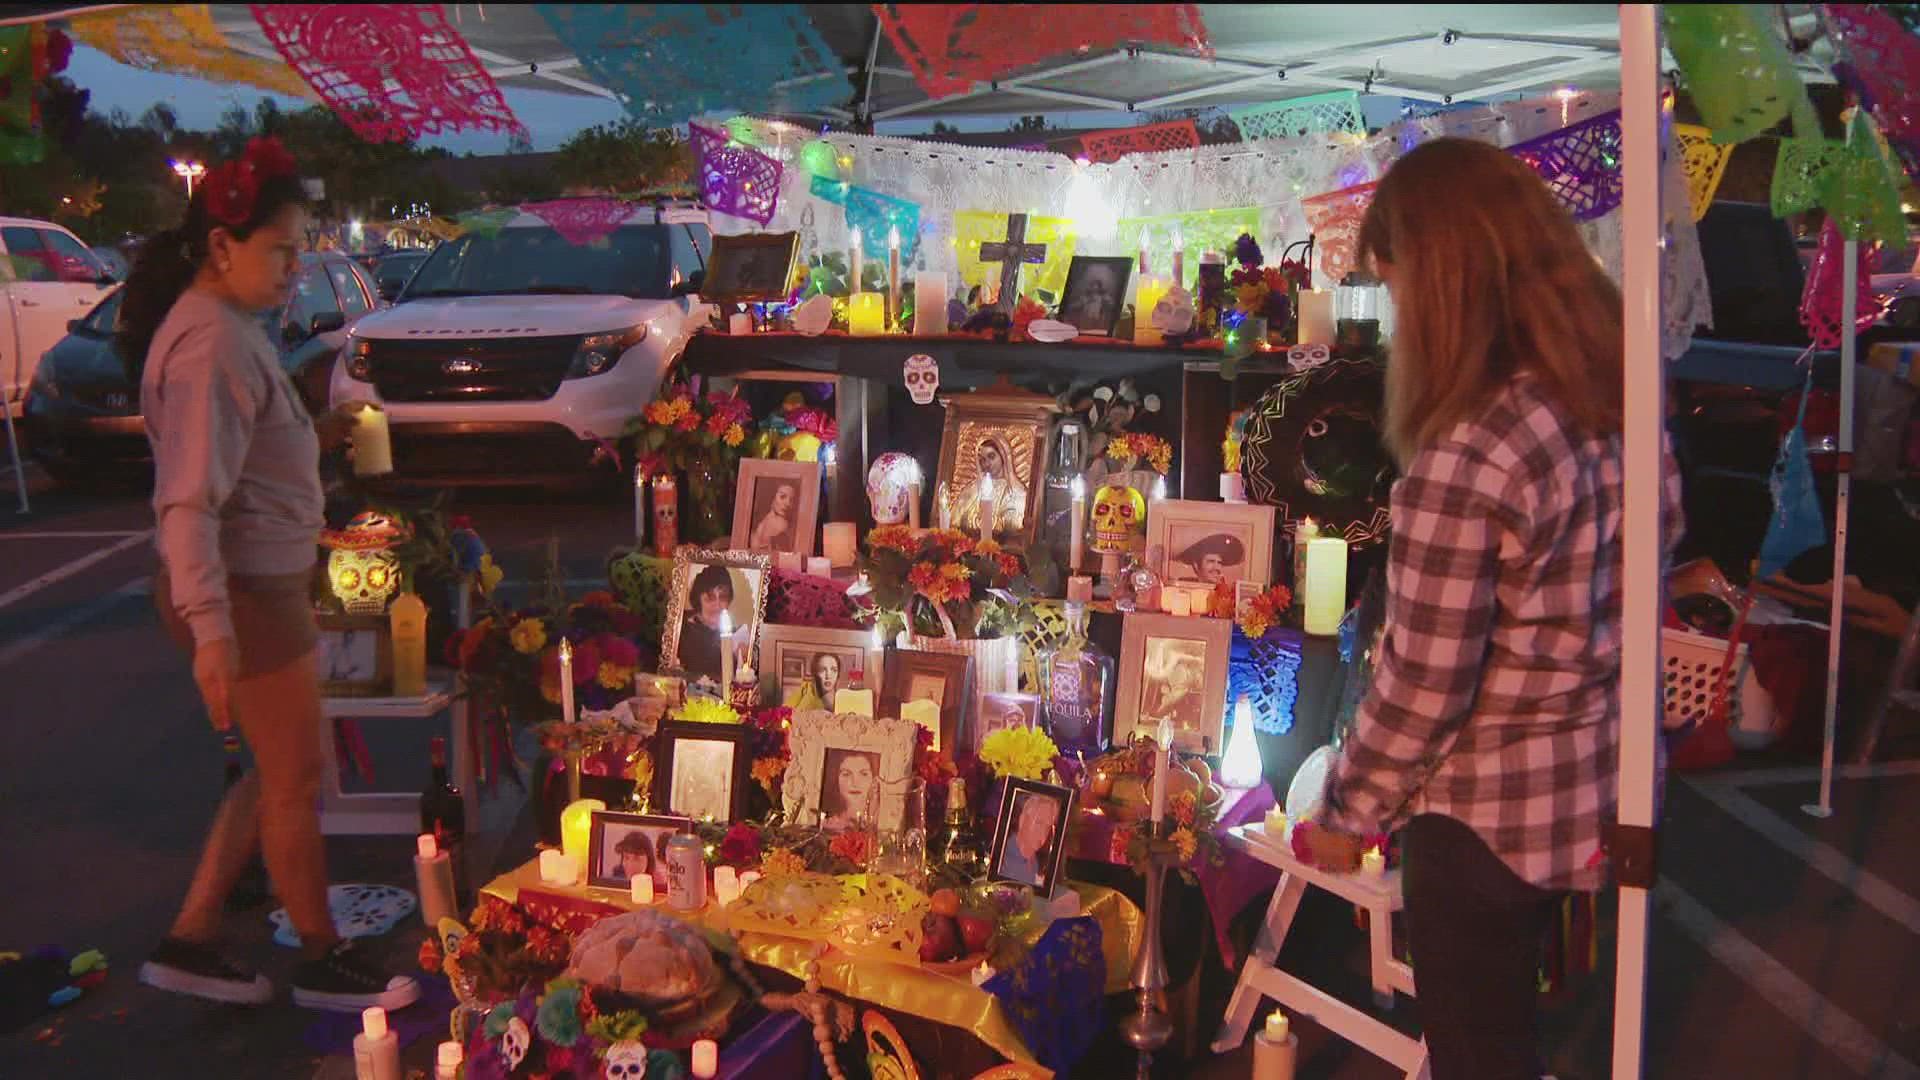 Several cities across San Diego have taken part in the festivities, from Chula Vista to National City where dozens of altars were decorated to honor loved ones